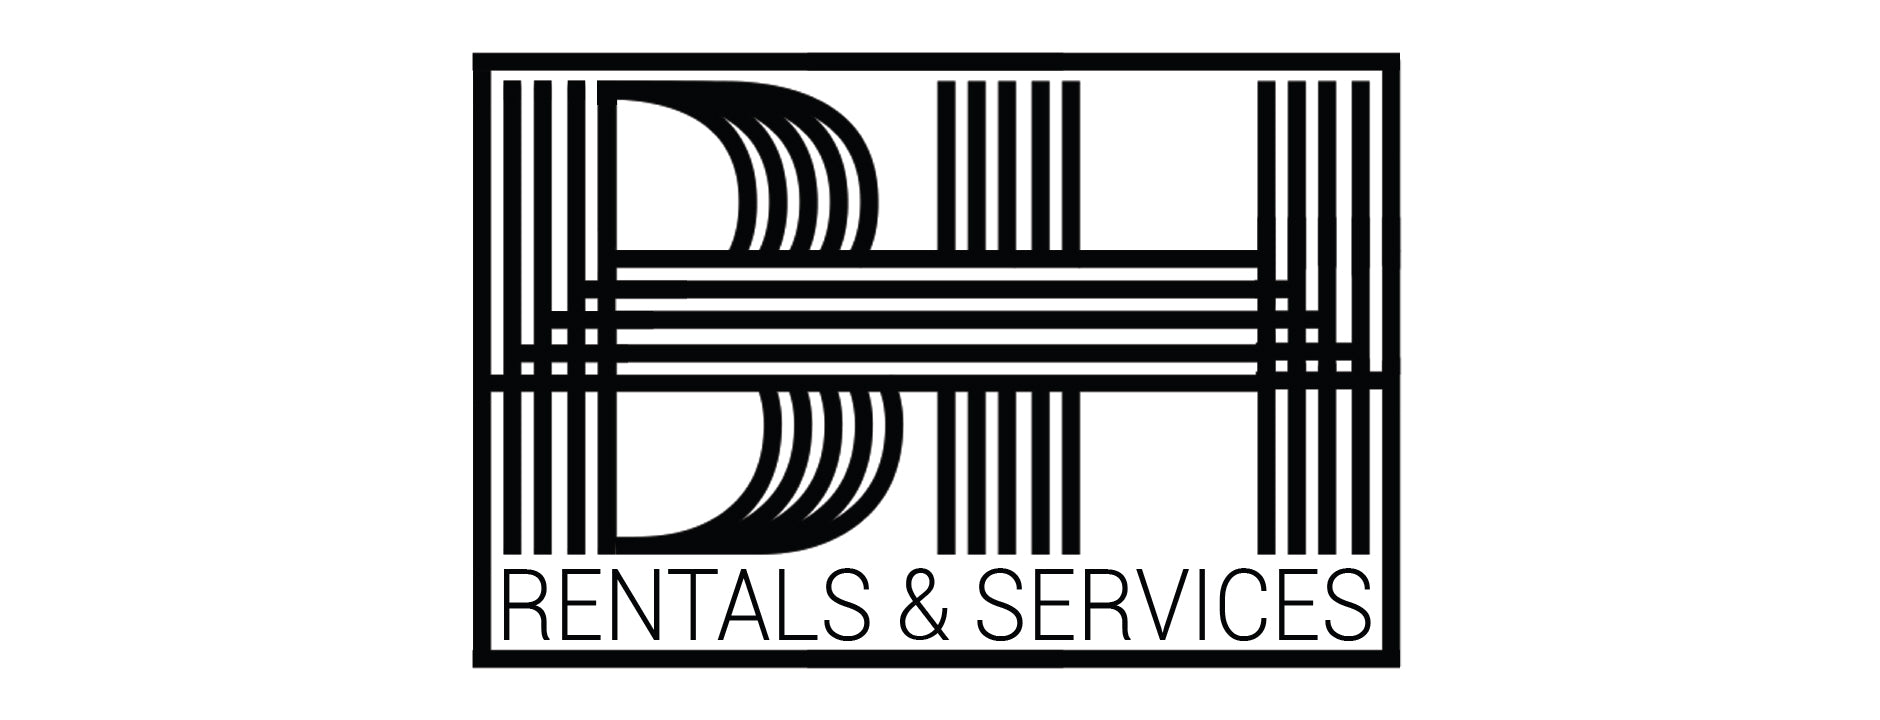 BH Rentals and Services